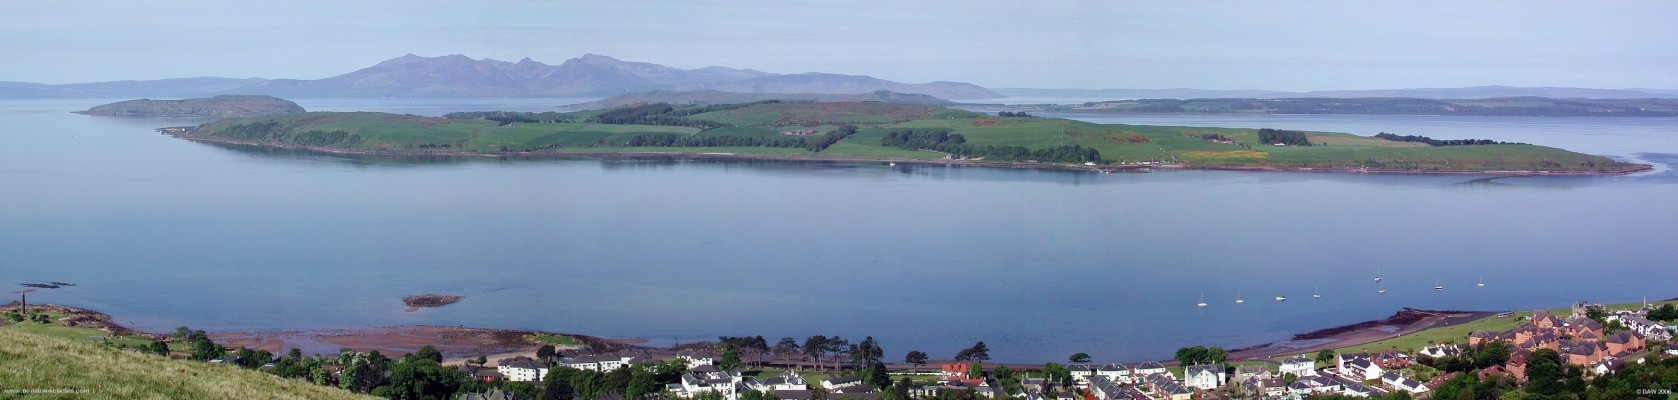 Great Cumbrae and Arran panorama, Firth of Clyde
A peaceful Sunday morning view over the firth of Clyde from the top of Douglas Park in Largs.   The great Cumbrae is the closest (population 1400), to the left  is the Wee Cumbrae (population less than 10),  in the distance is the Isle of Arran (Population around 5000) and to the right is the Island of Bute with a population of around 7100.
